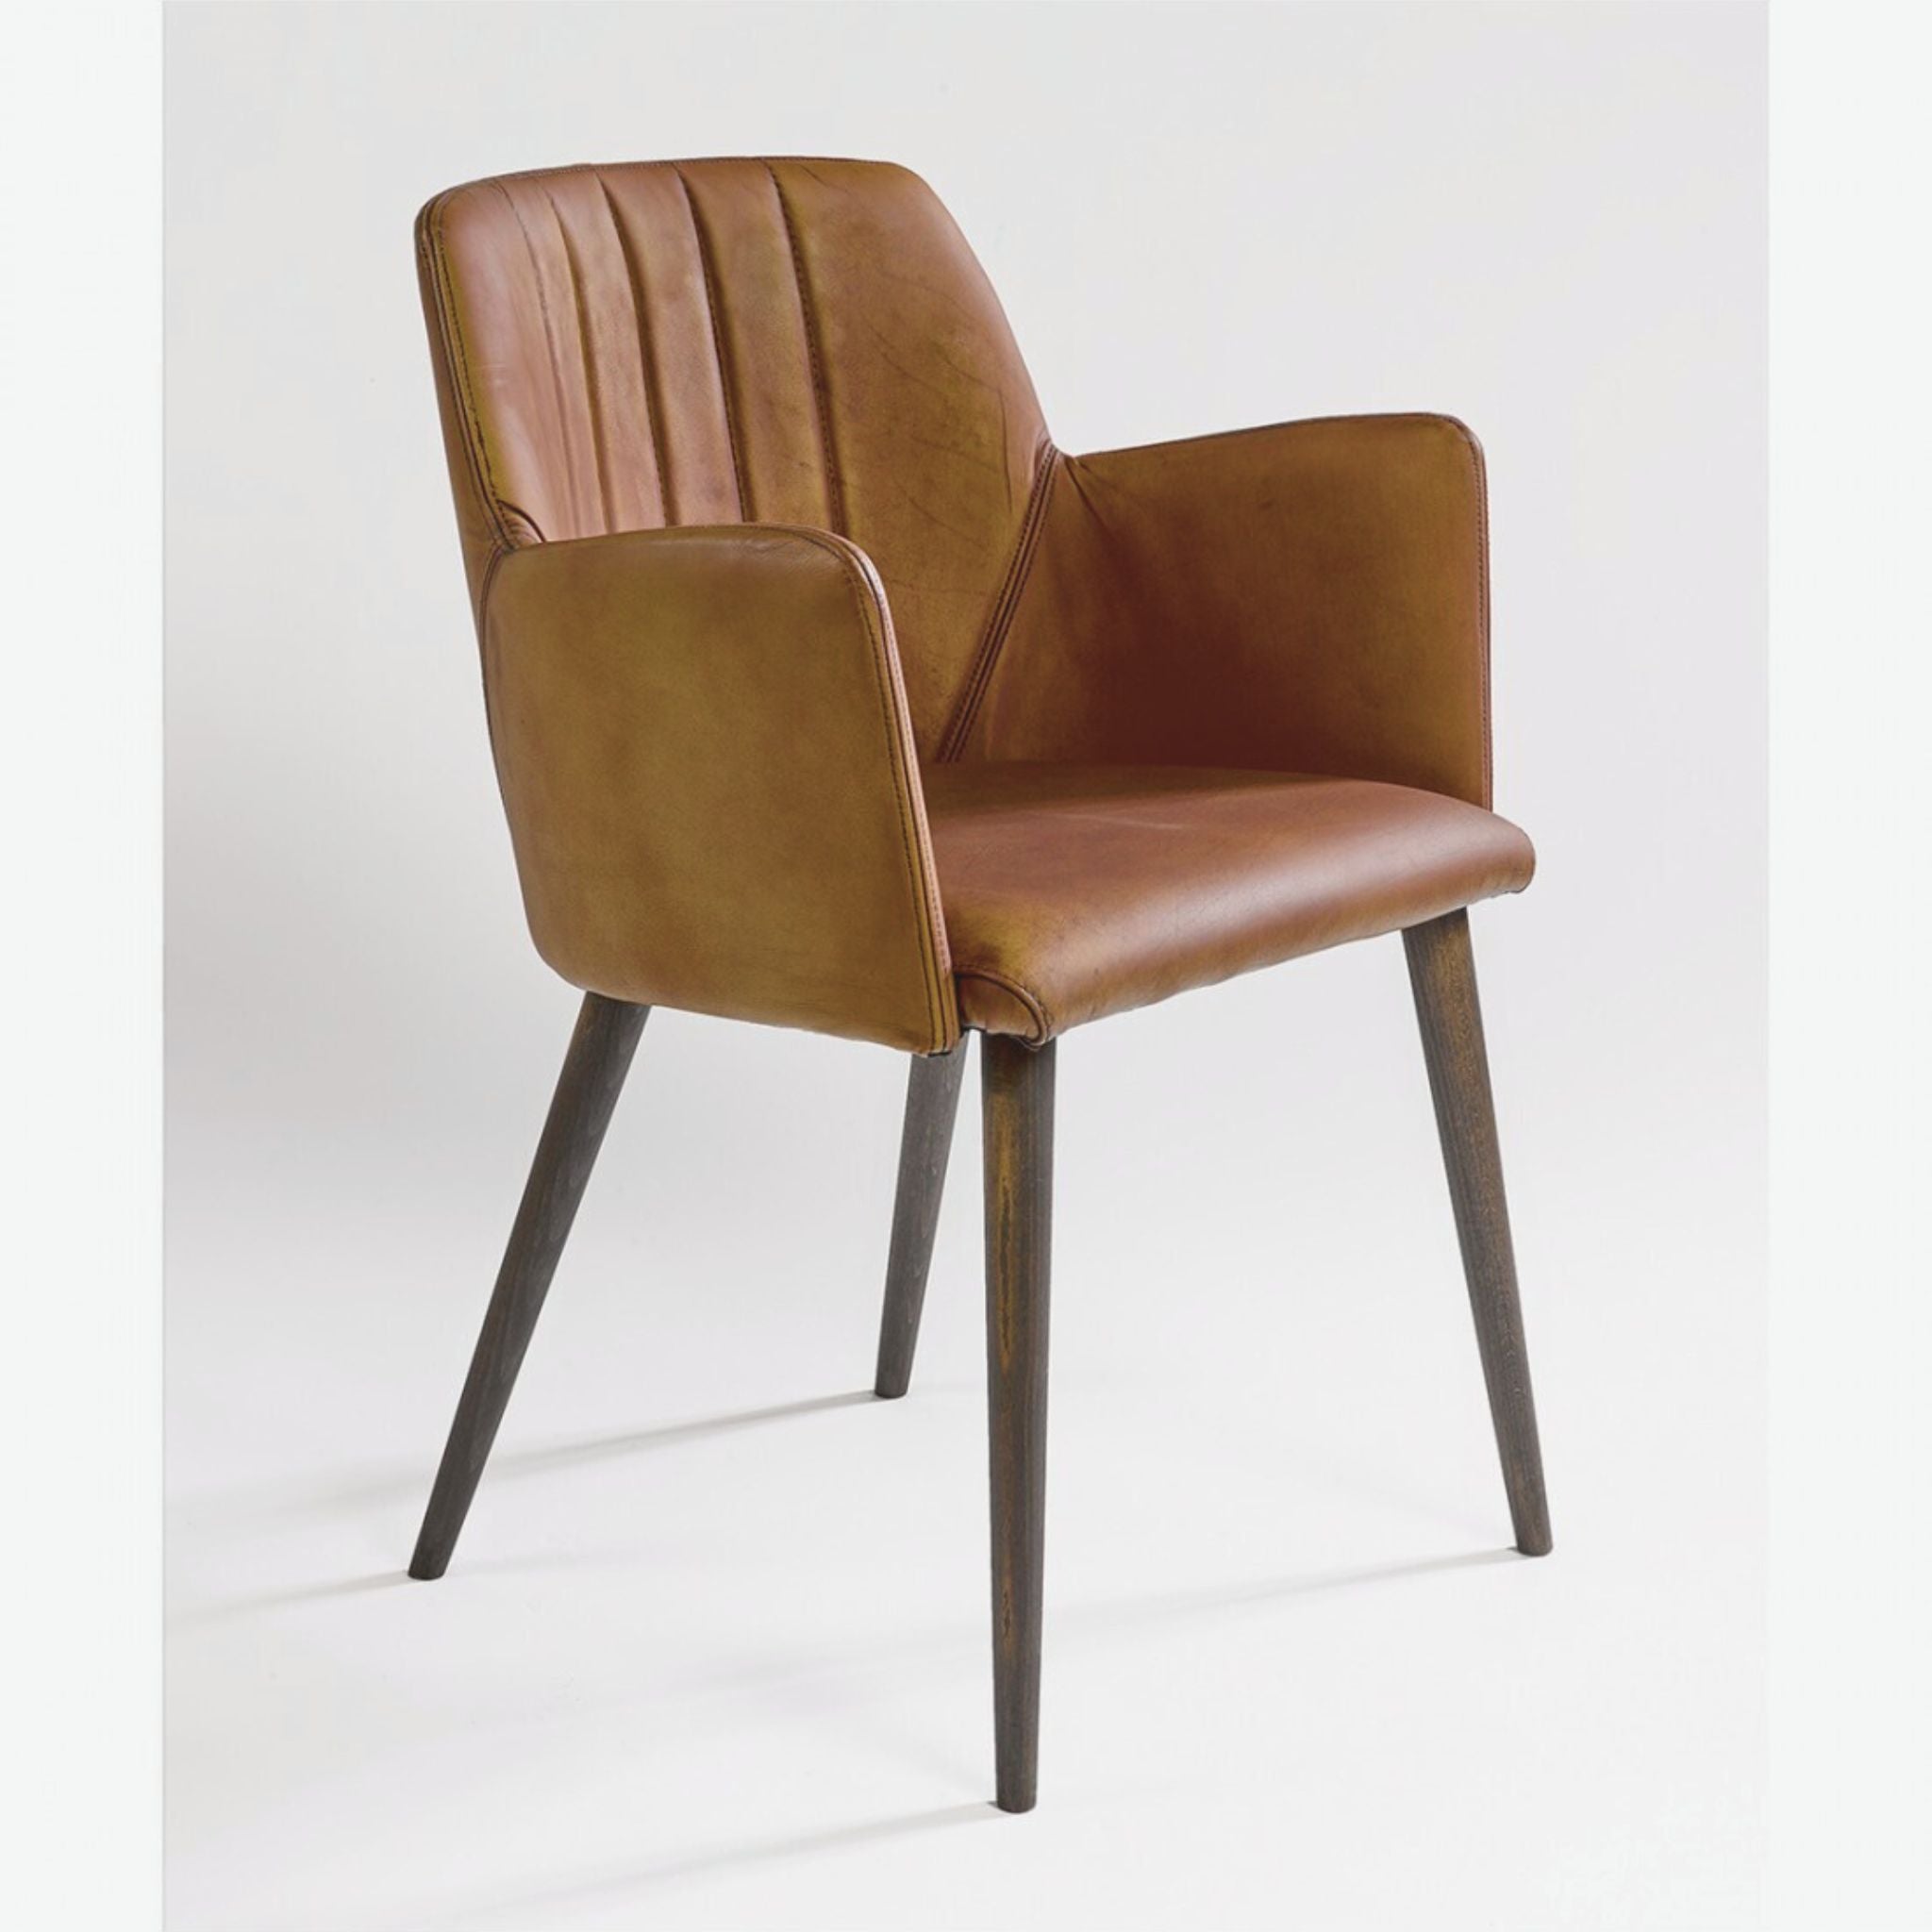 Crisal Decoracion Leather Dining Chair with Wooden Legs - ModernistaLiving